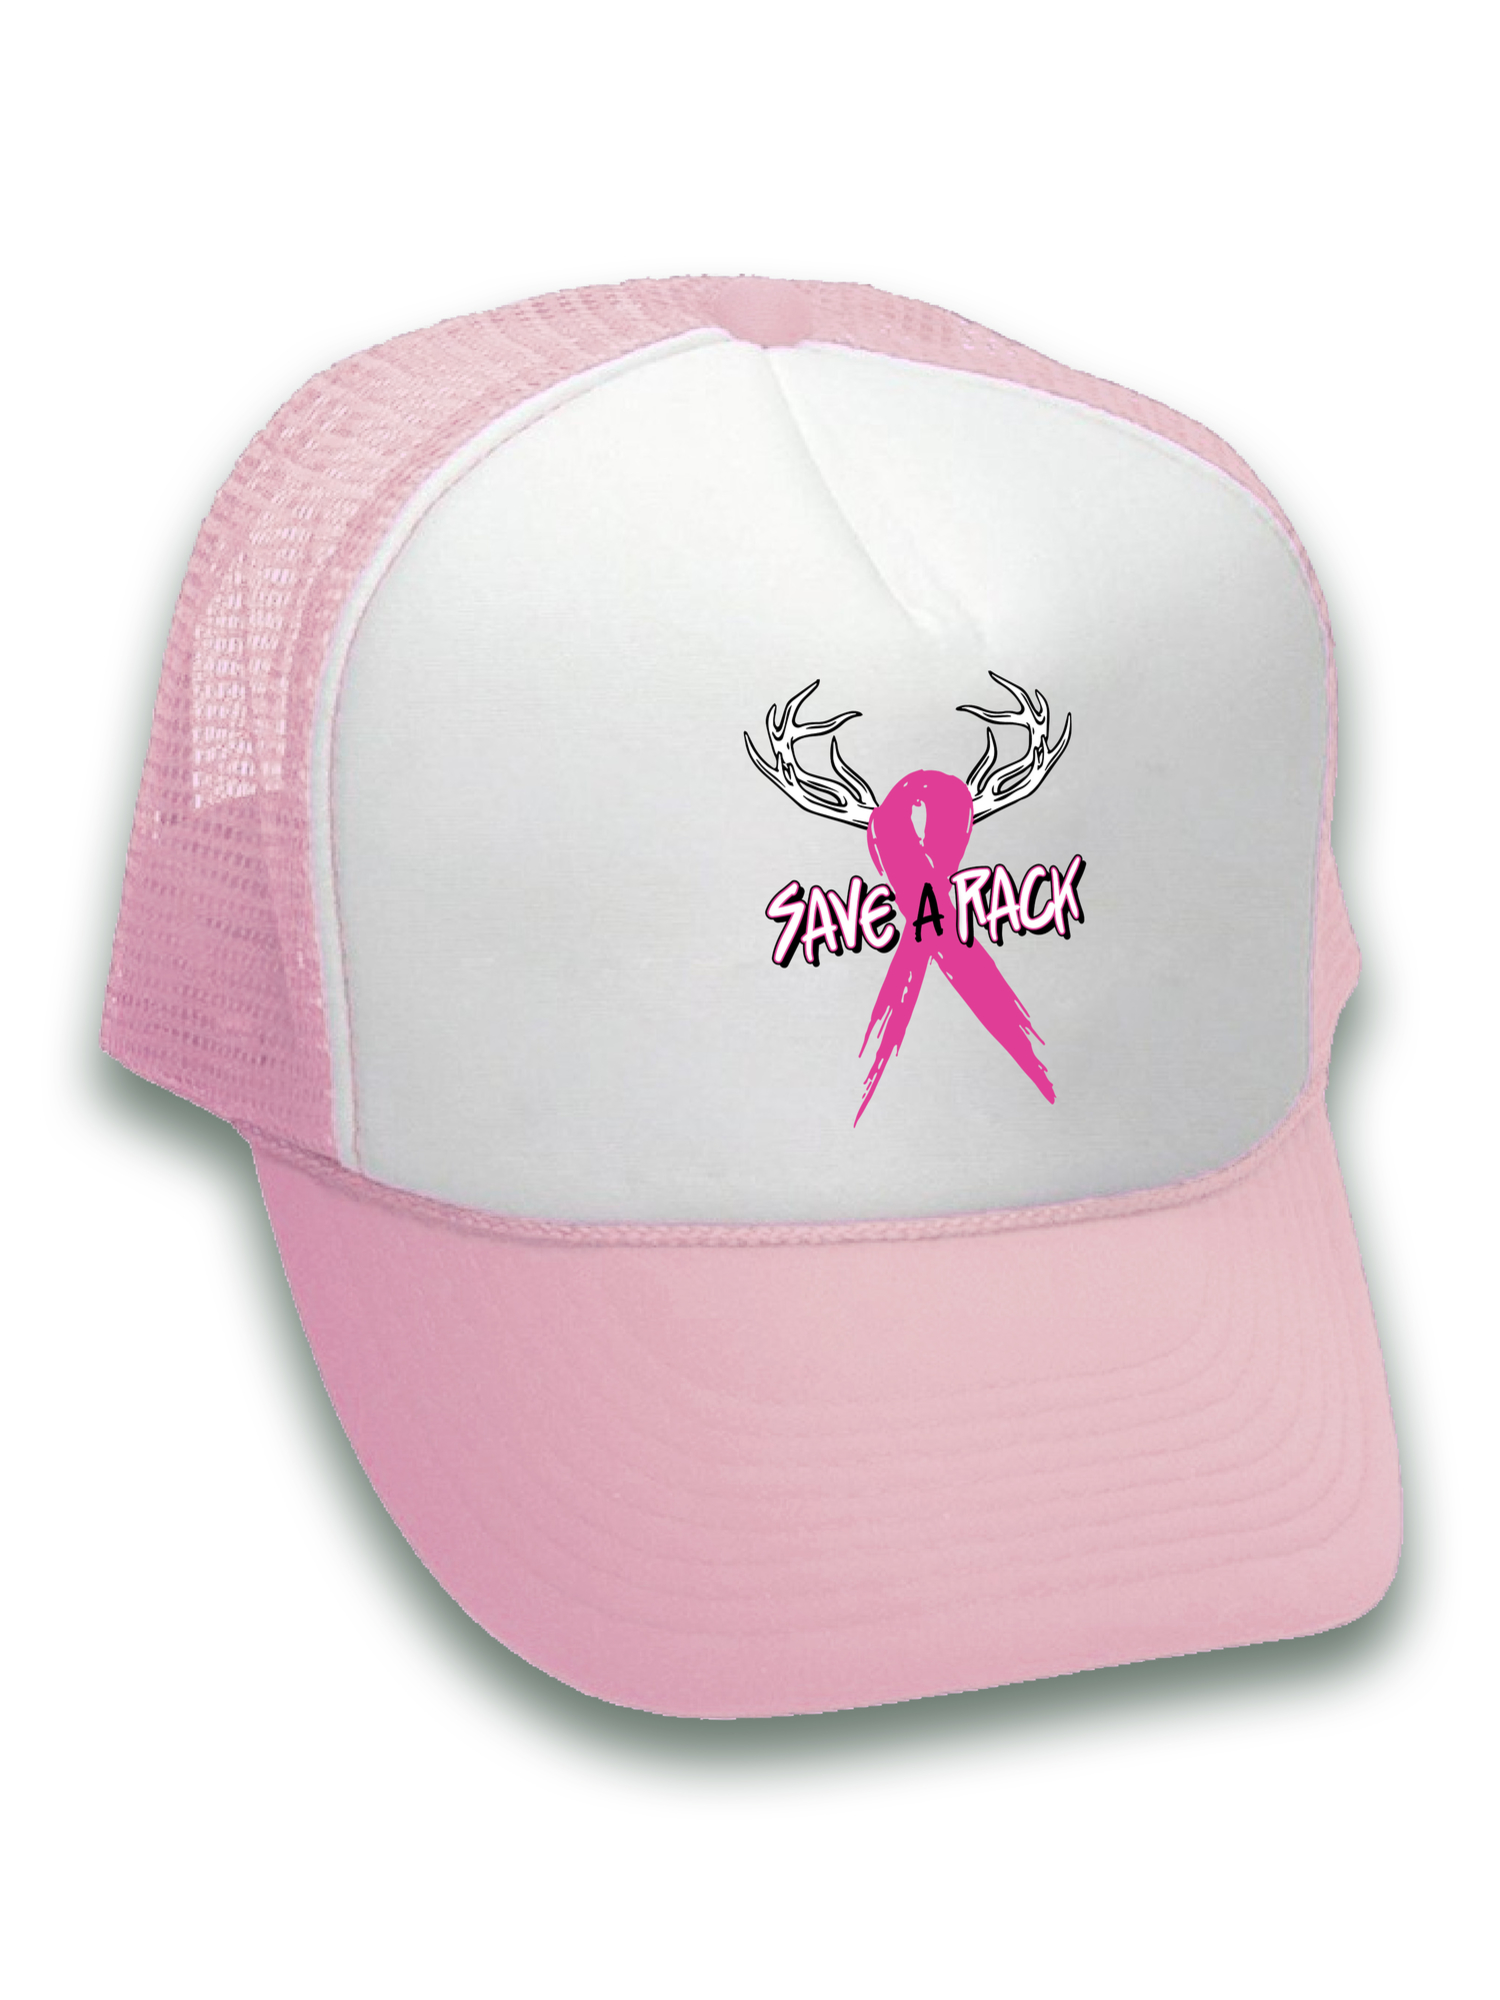 Awkward Styles Save A Rack Trucker Hat Breast Cancer Awareness Hats for Men and Women Pink Ribbon Baseball Hat Gifts for Cancer Survivor Cancer Awareness Headwear Breast Cancer Ribbon Dad Hat - image 2 of 6